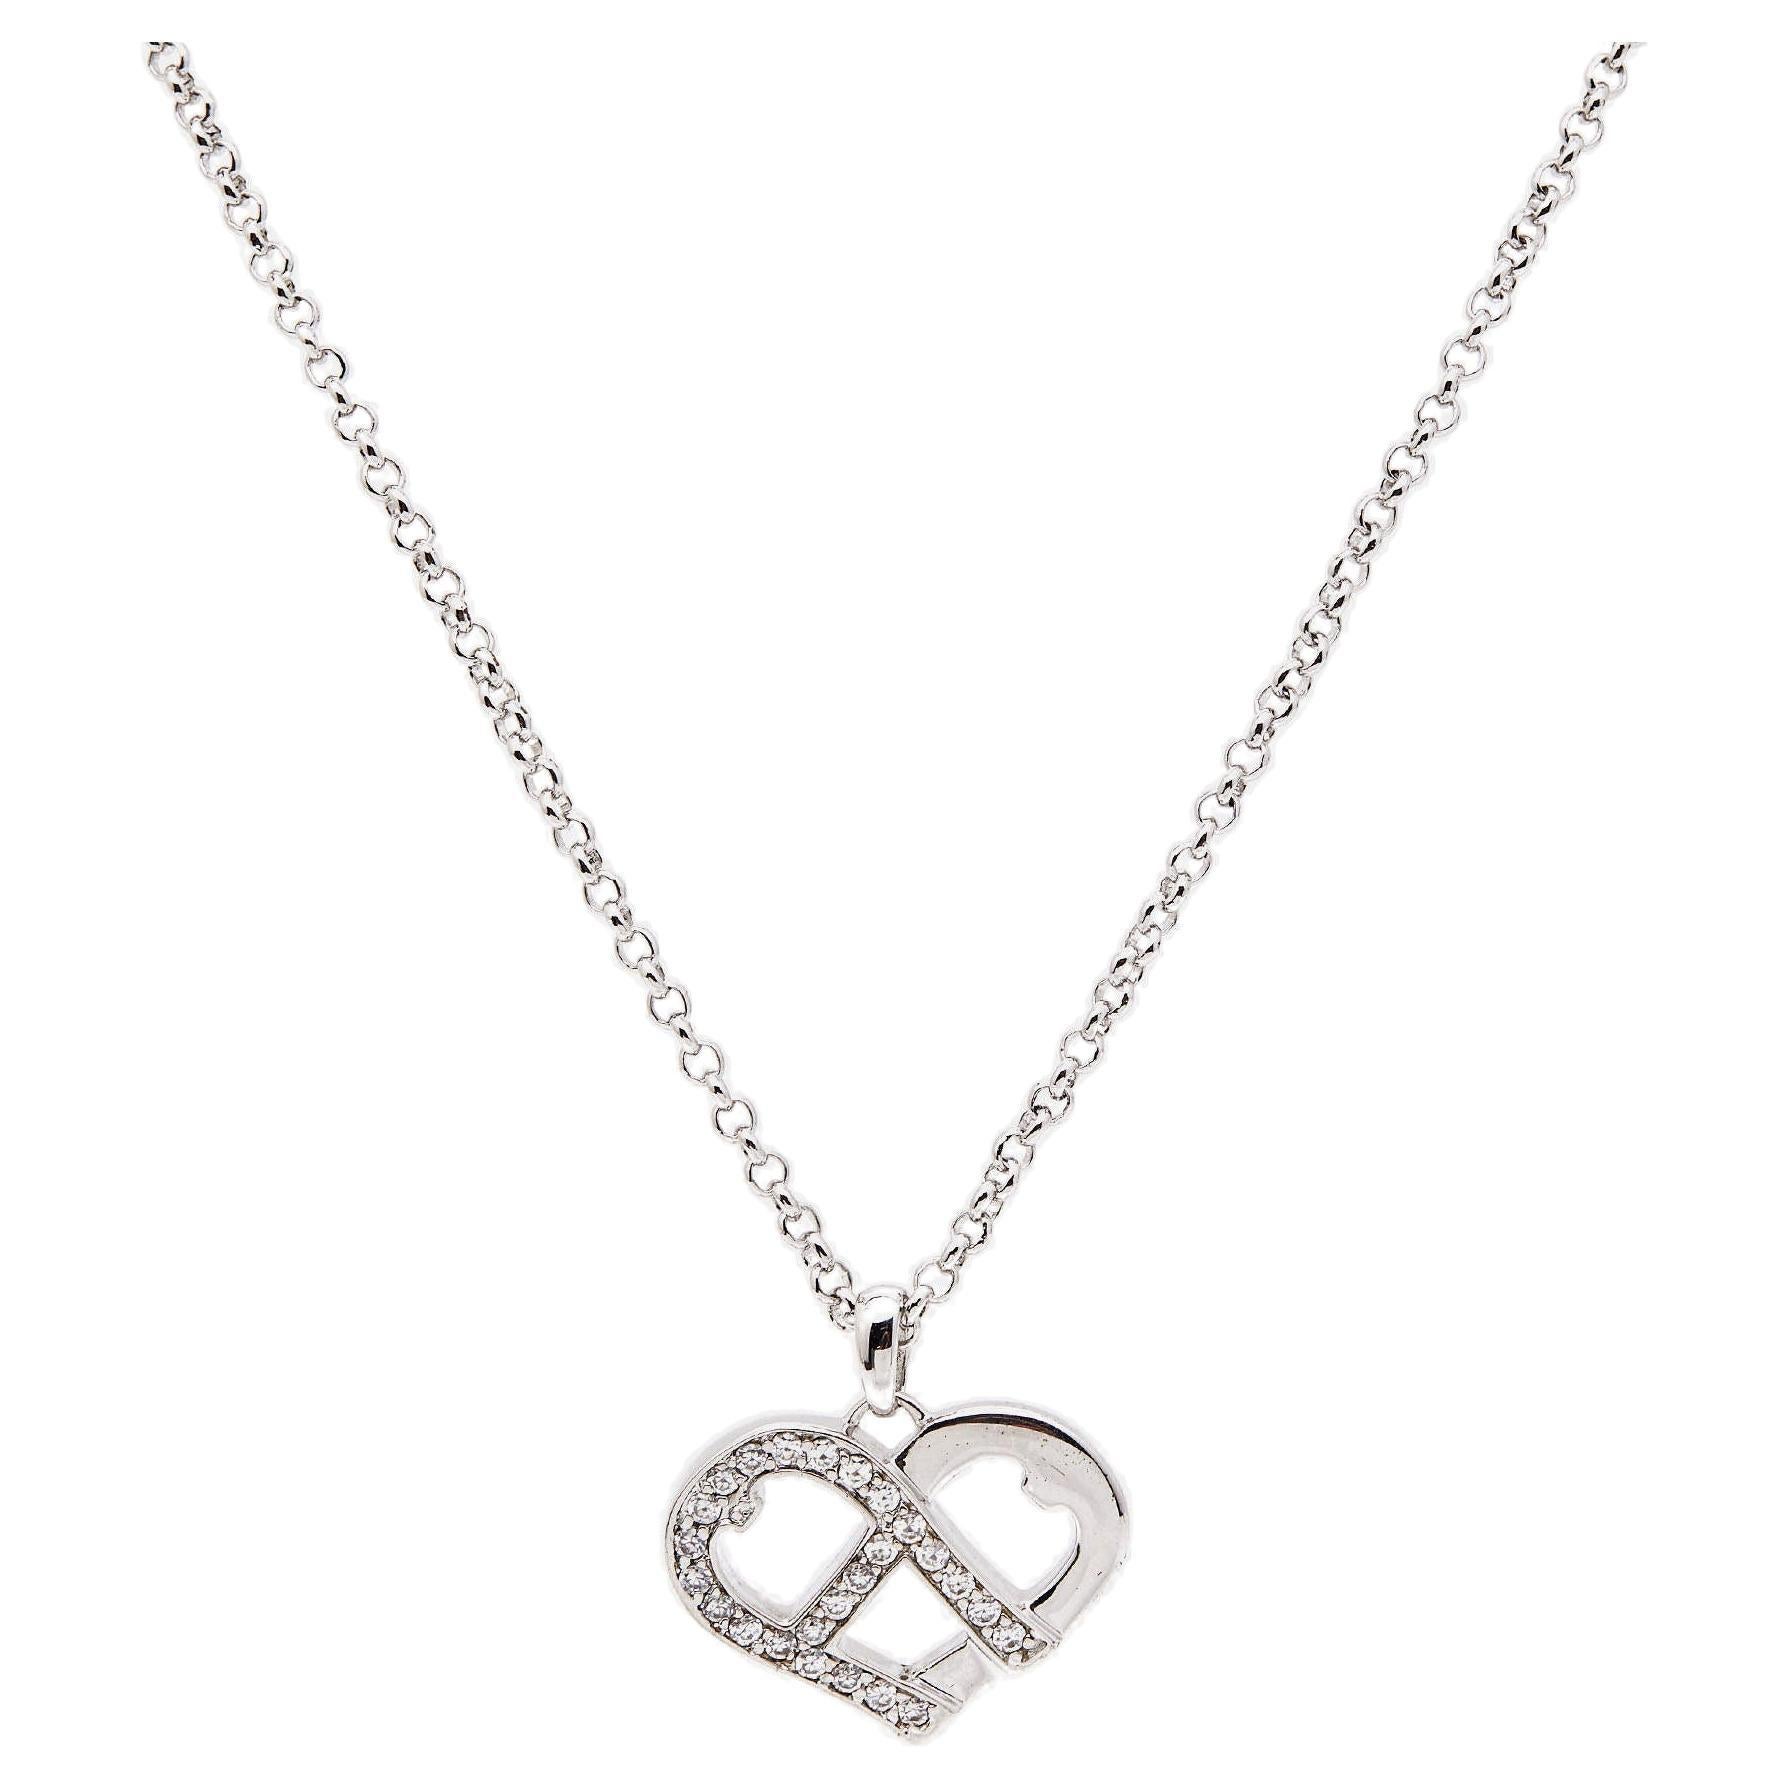 Aigner Crystal Silver Tone Necklace For Sale